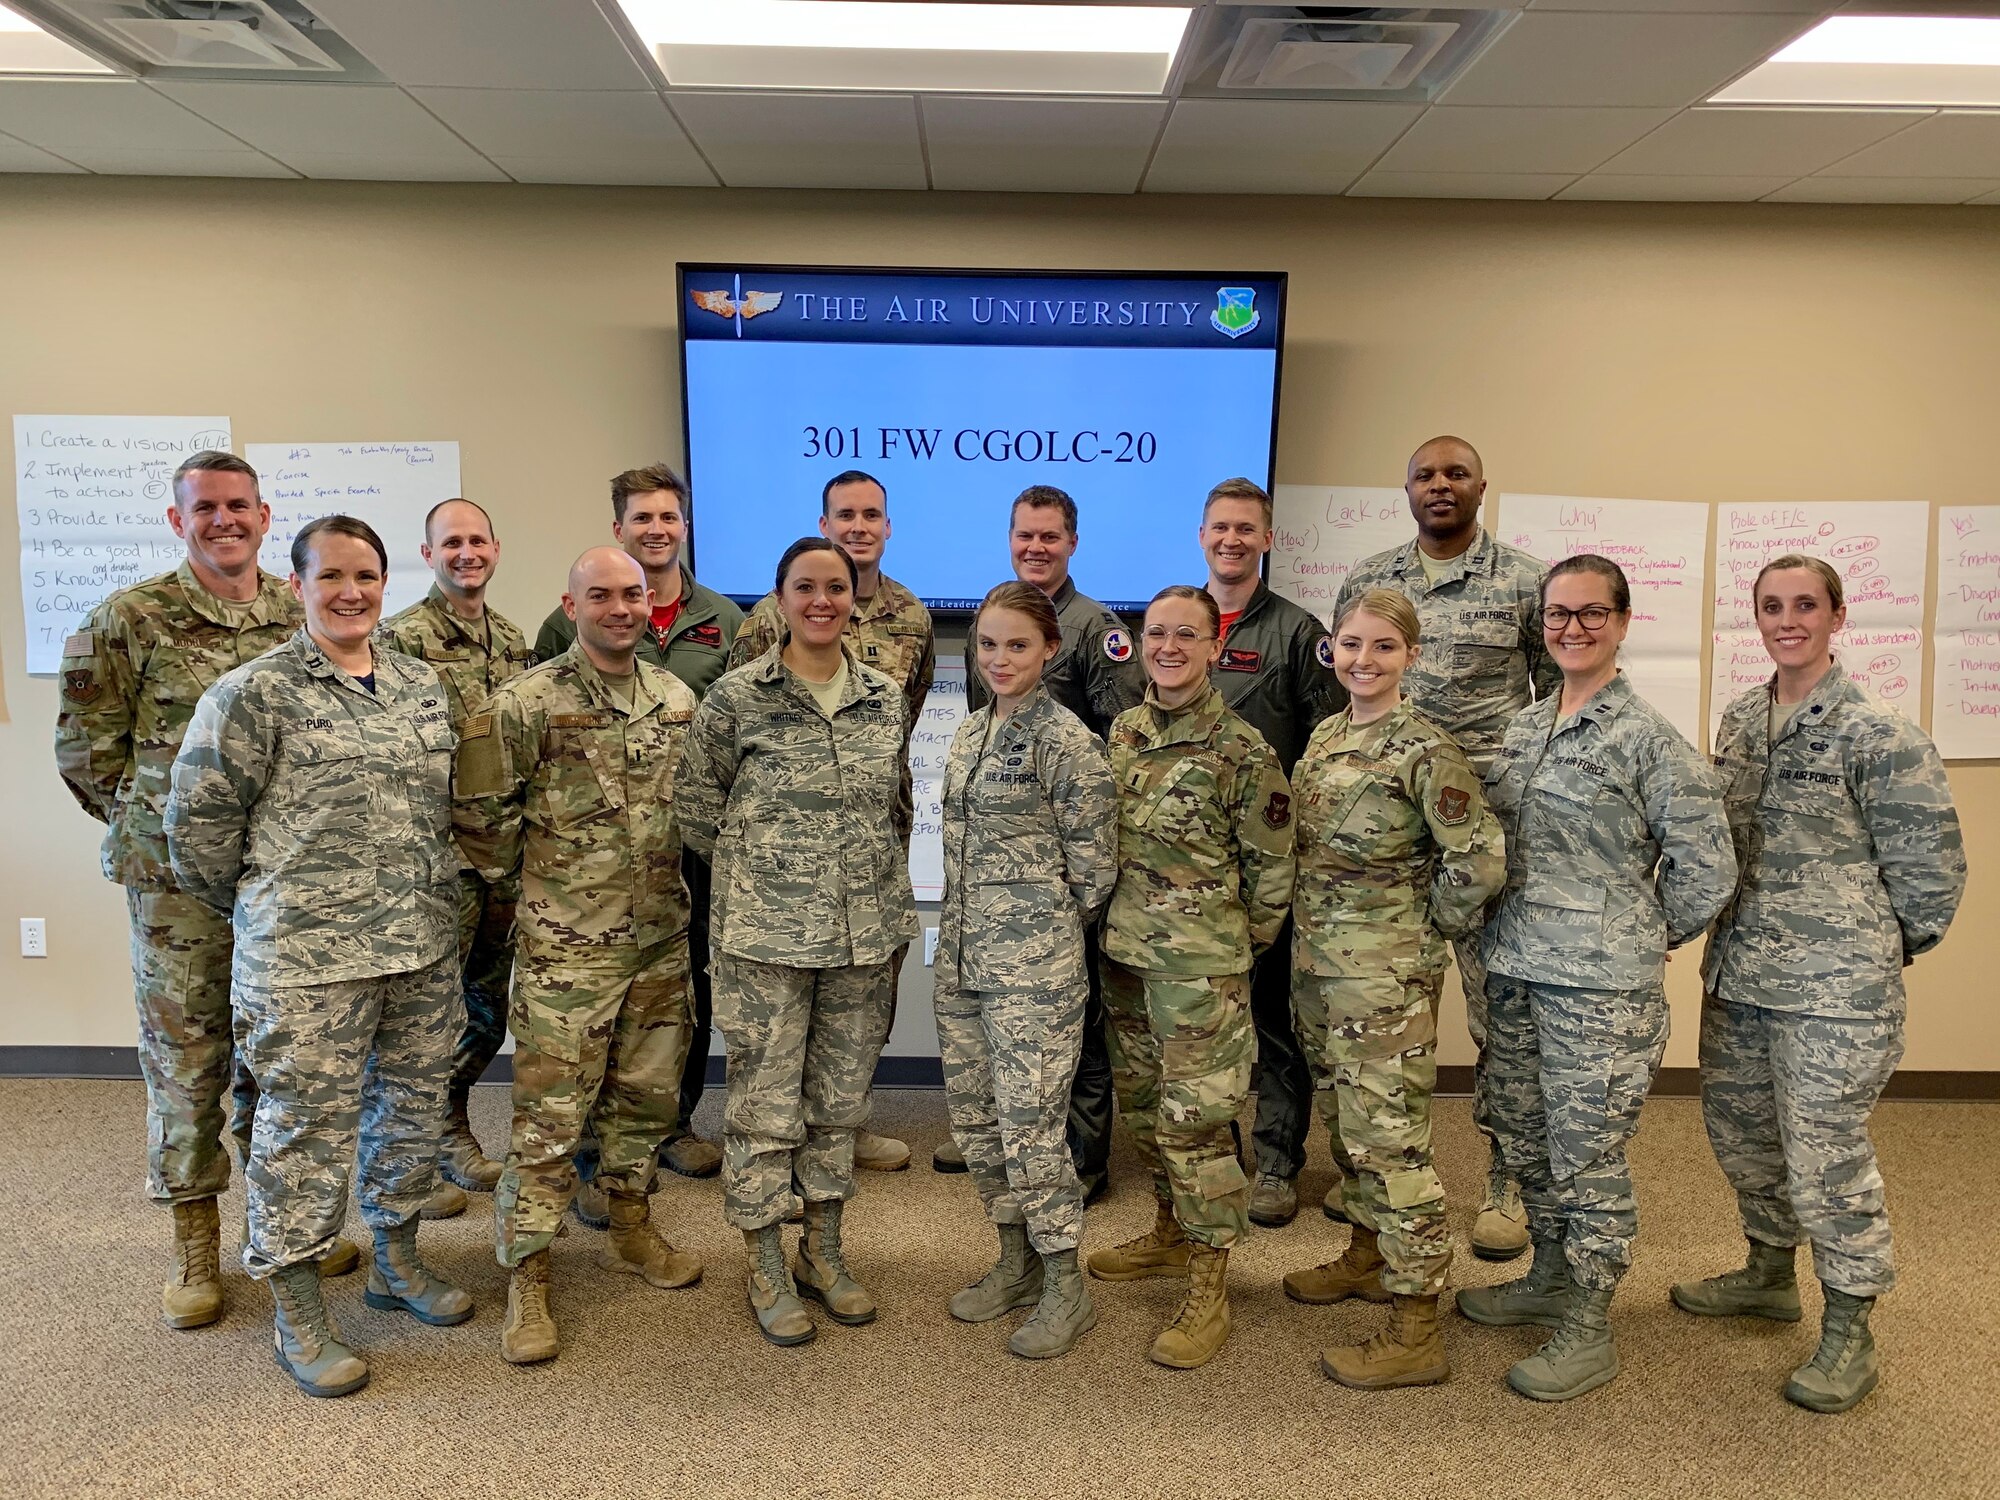 Reserve Citizen Airmen from the 301st Fighter Wing Force Support Squadron assigned here hosted leadership development courses for officers from various units February 10 - 14. The CGOLC was held in-residence for the first time in wing history. (courtesy photo)